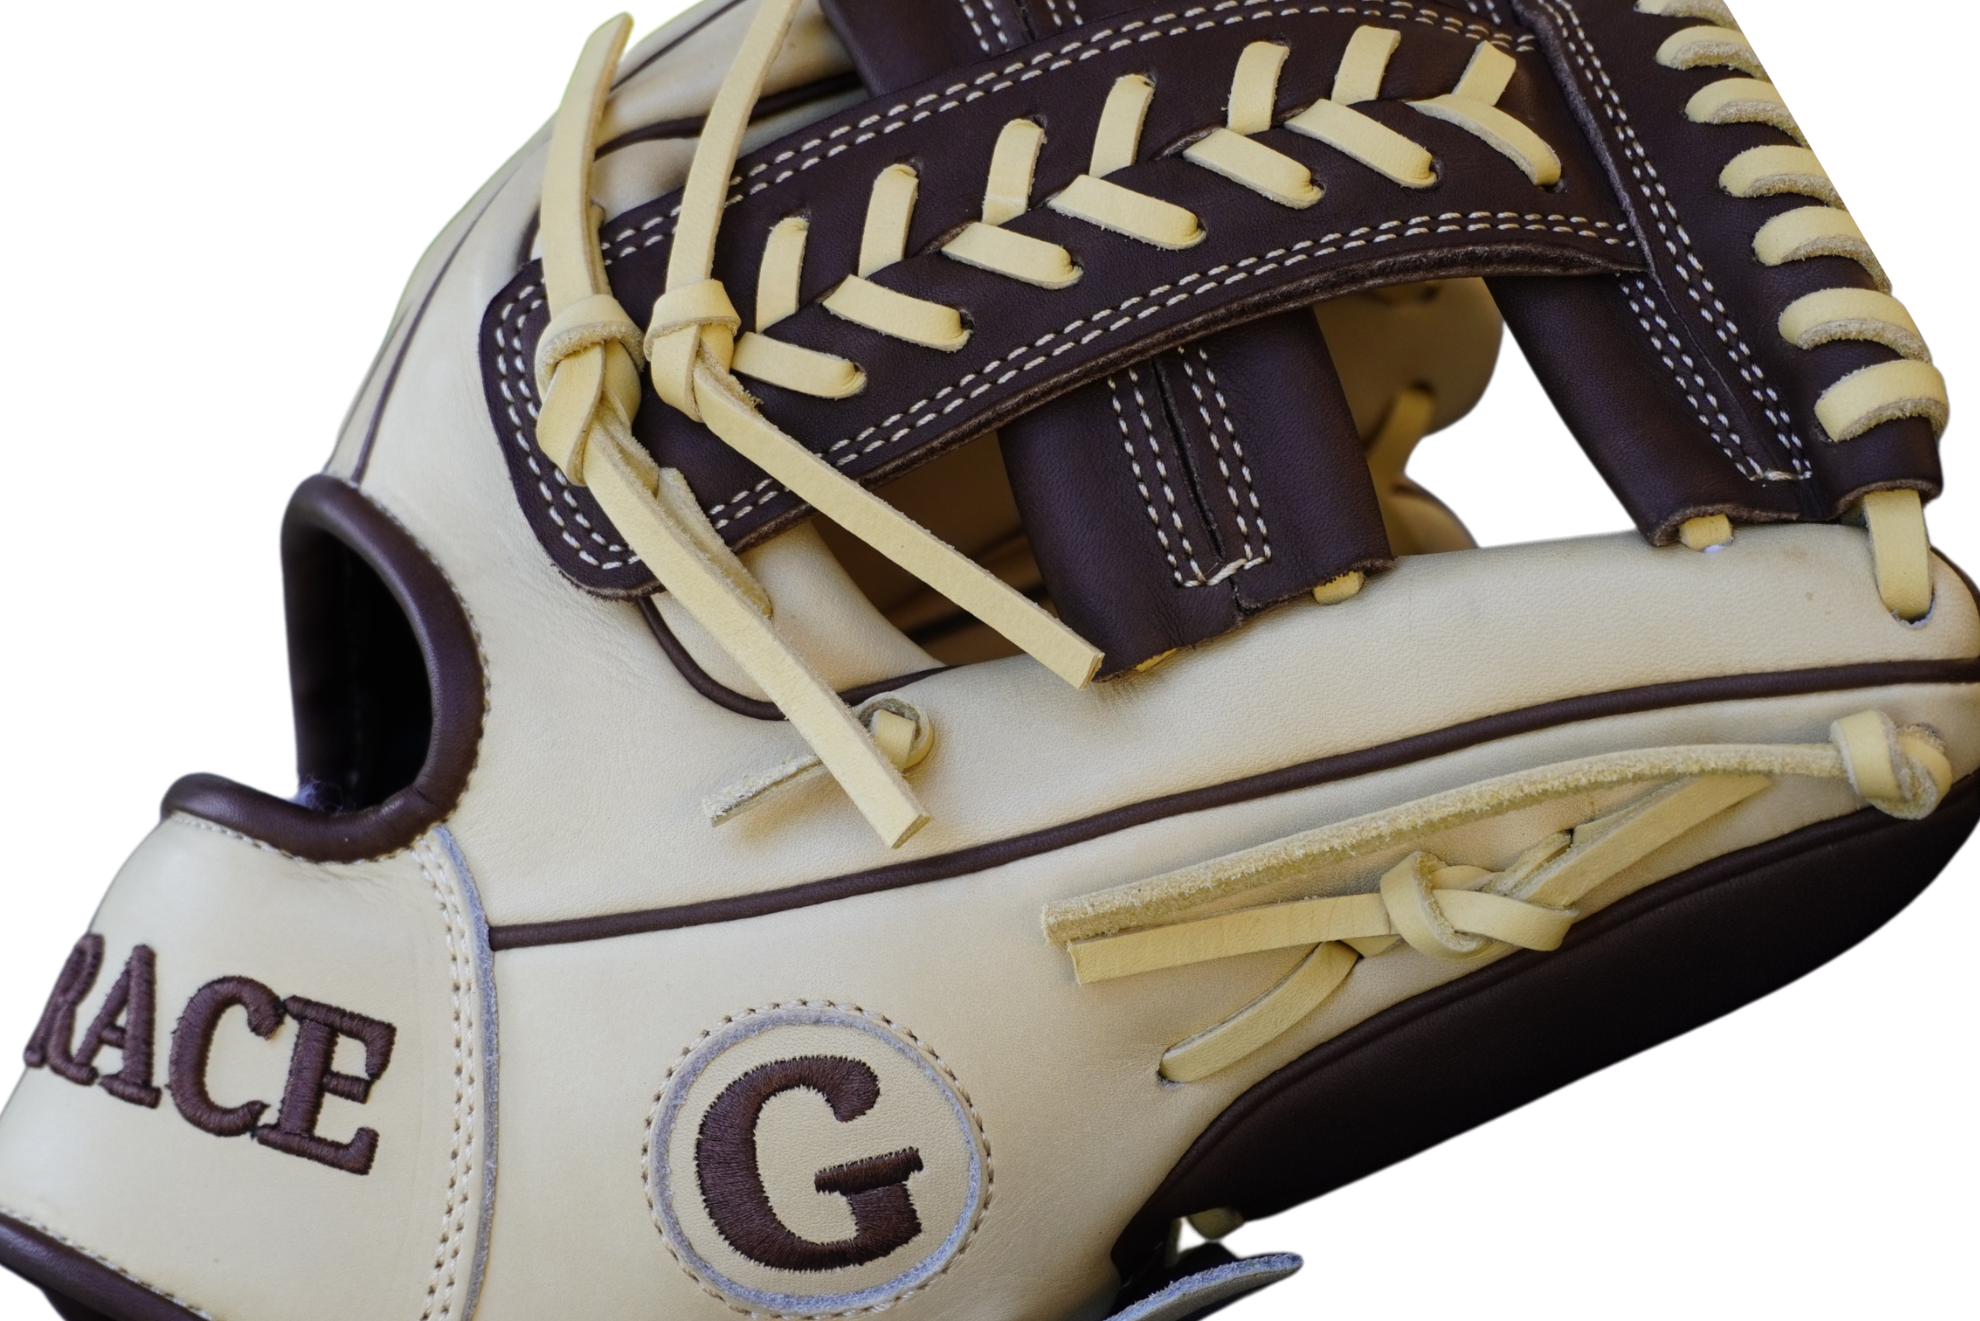 What are the Best Baseball Glove Brands?